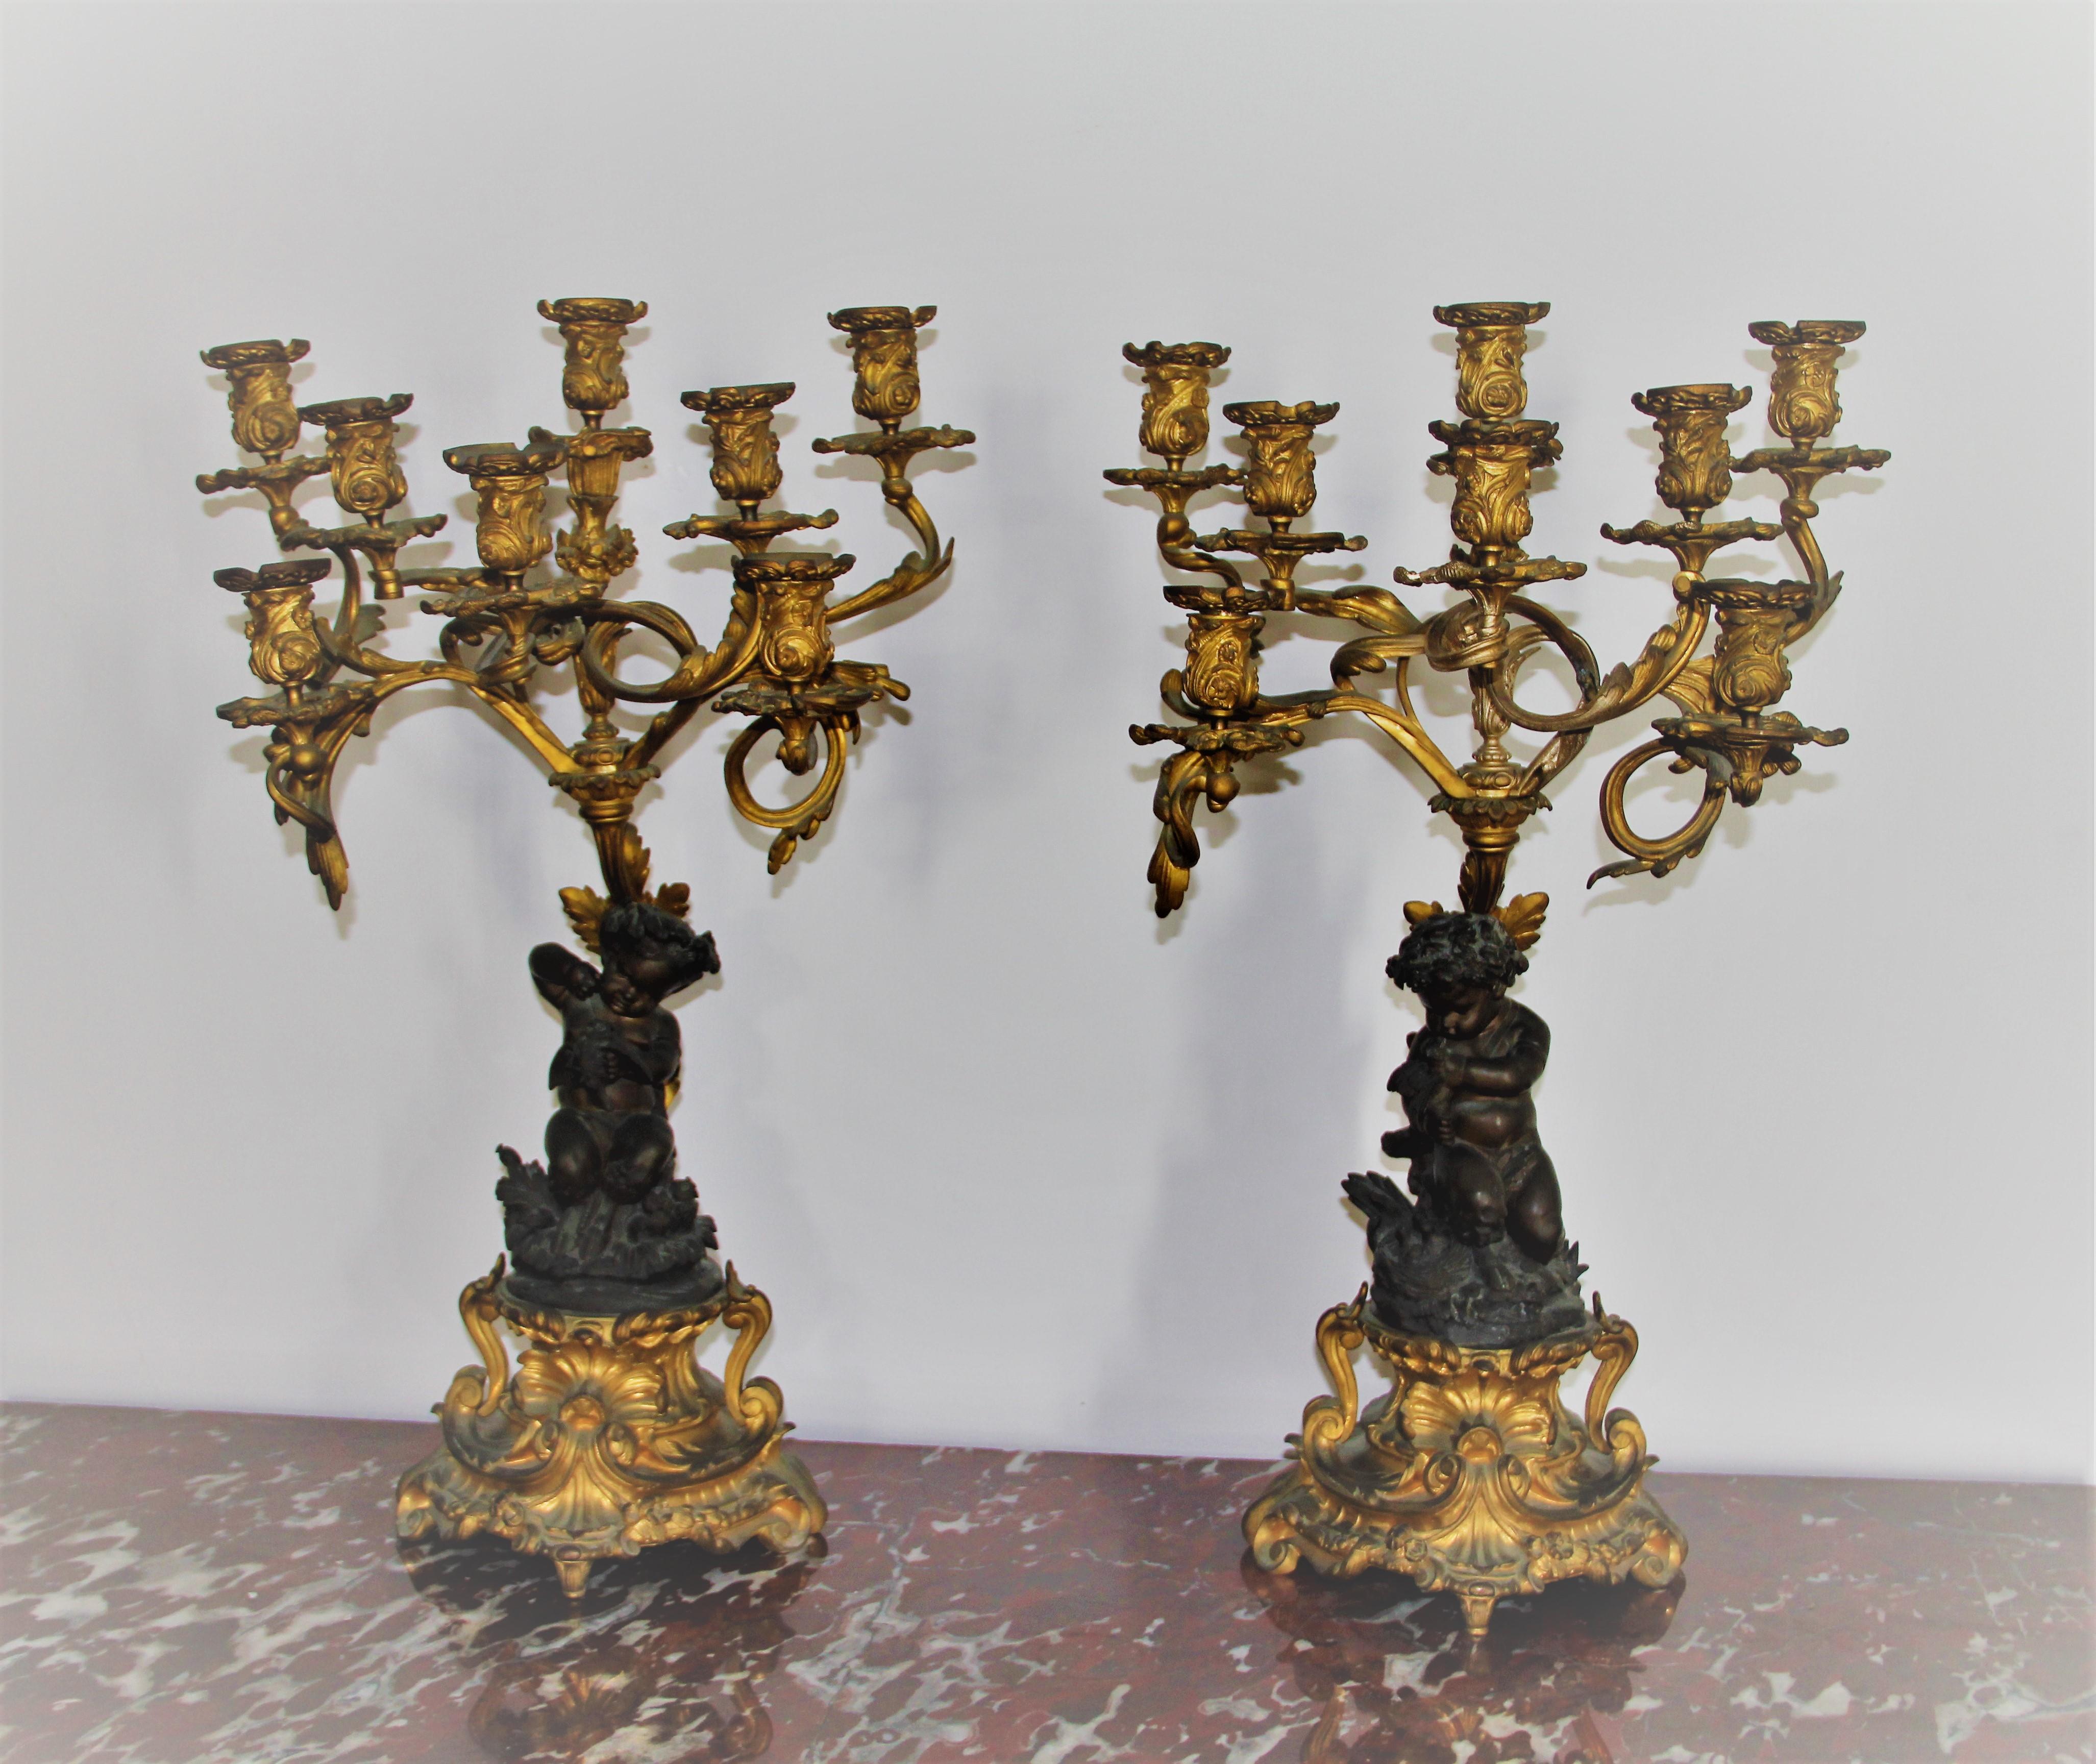 Pair of Bronze and Gilt-Bronze Candelabra Louis XV Style, Mid-19th Century For Sale 15